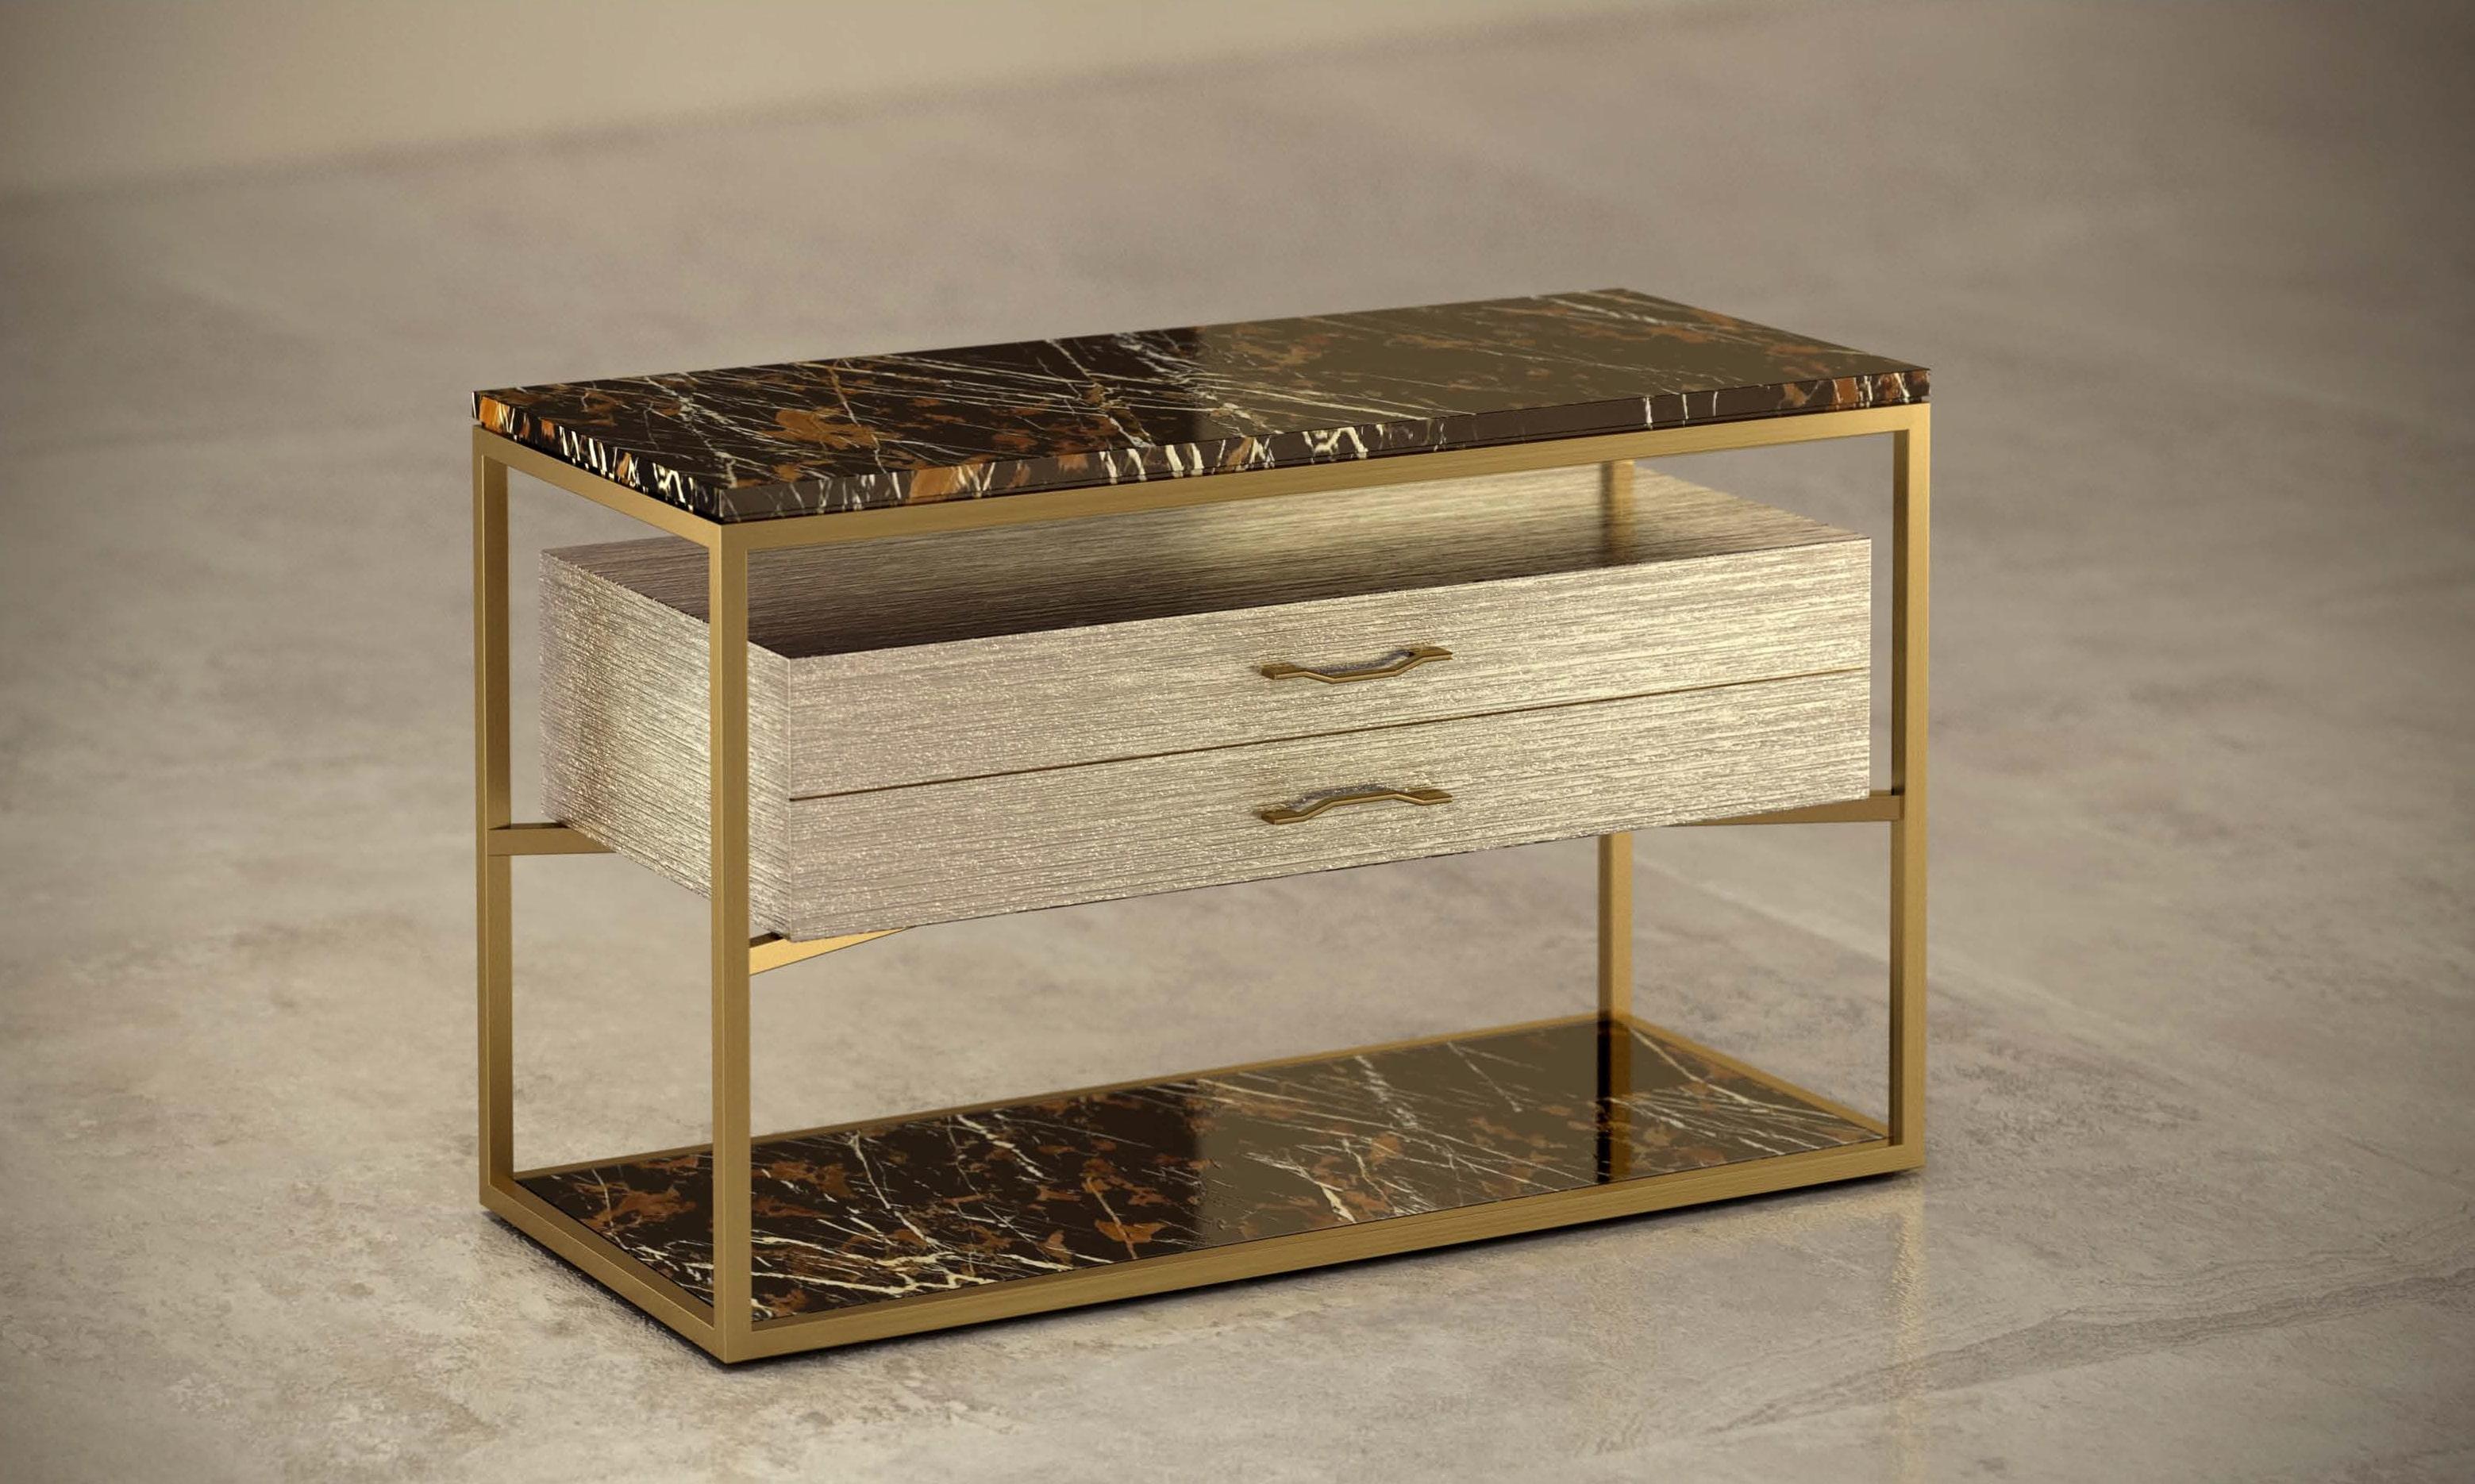 - Bedside table composed in marble, wood and metal, created by Michele Arcarese Architect together with Giovannozzi.
- Top with groove, in marble type 